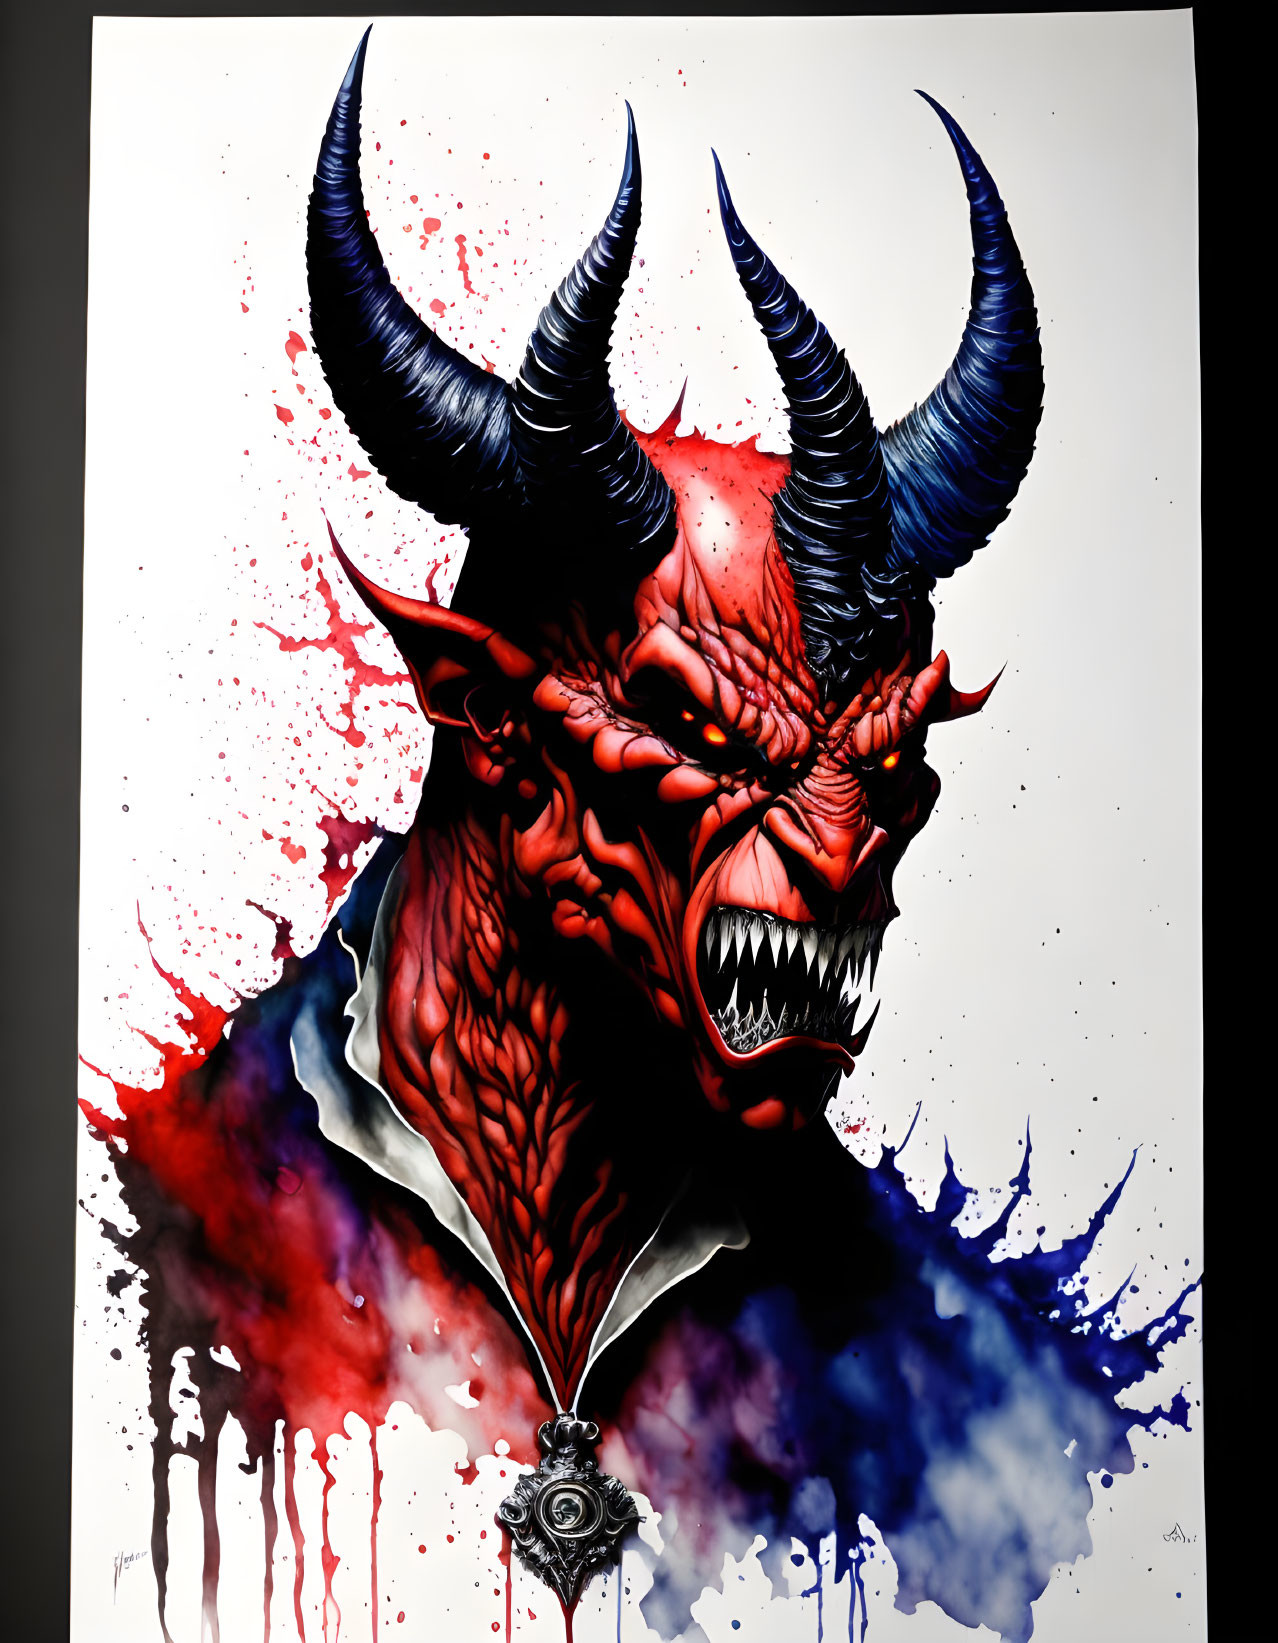 Vibrant red demonic figure with horns and intense eyes in splattered ink effect